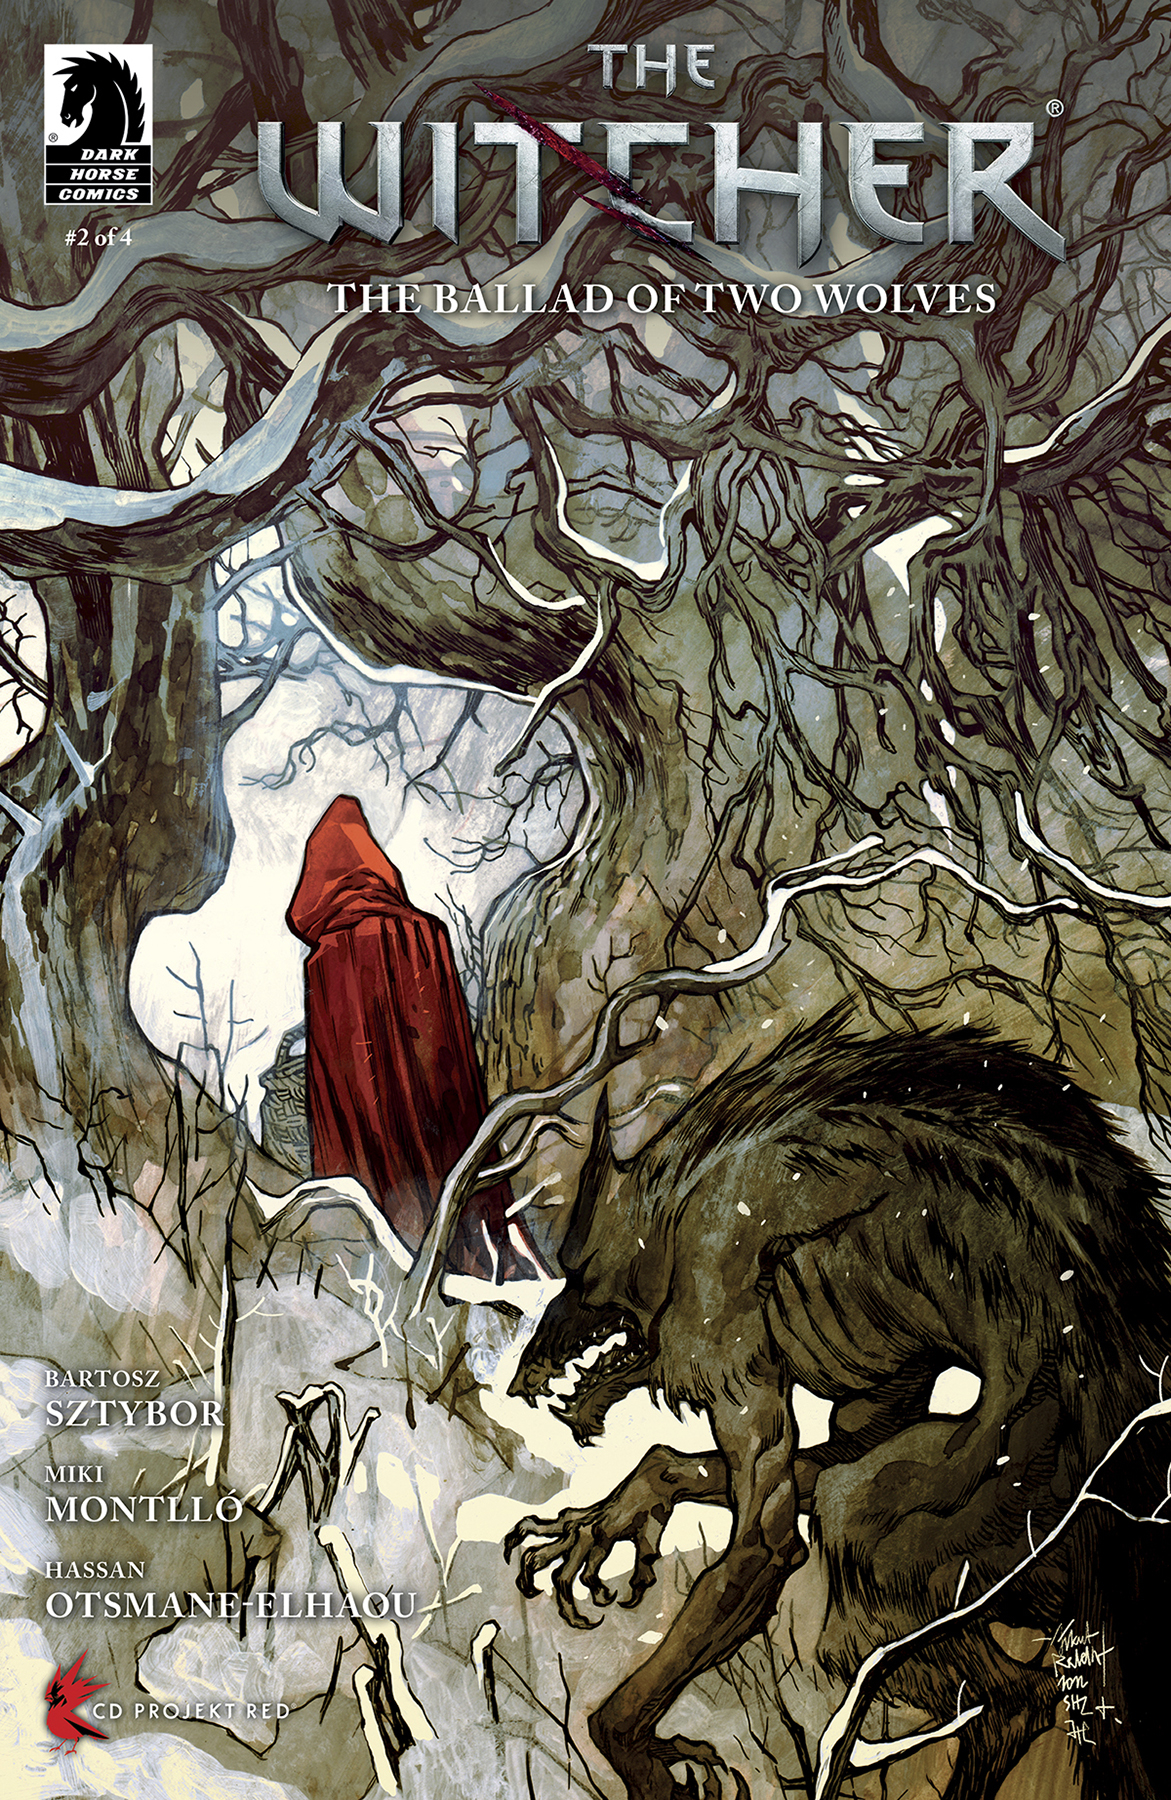 Witcher The Ballad of Two Wolves #2 Cover B Rebelka (Of 4)